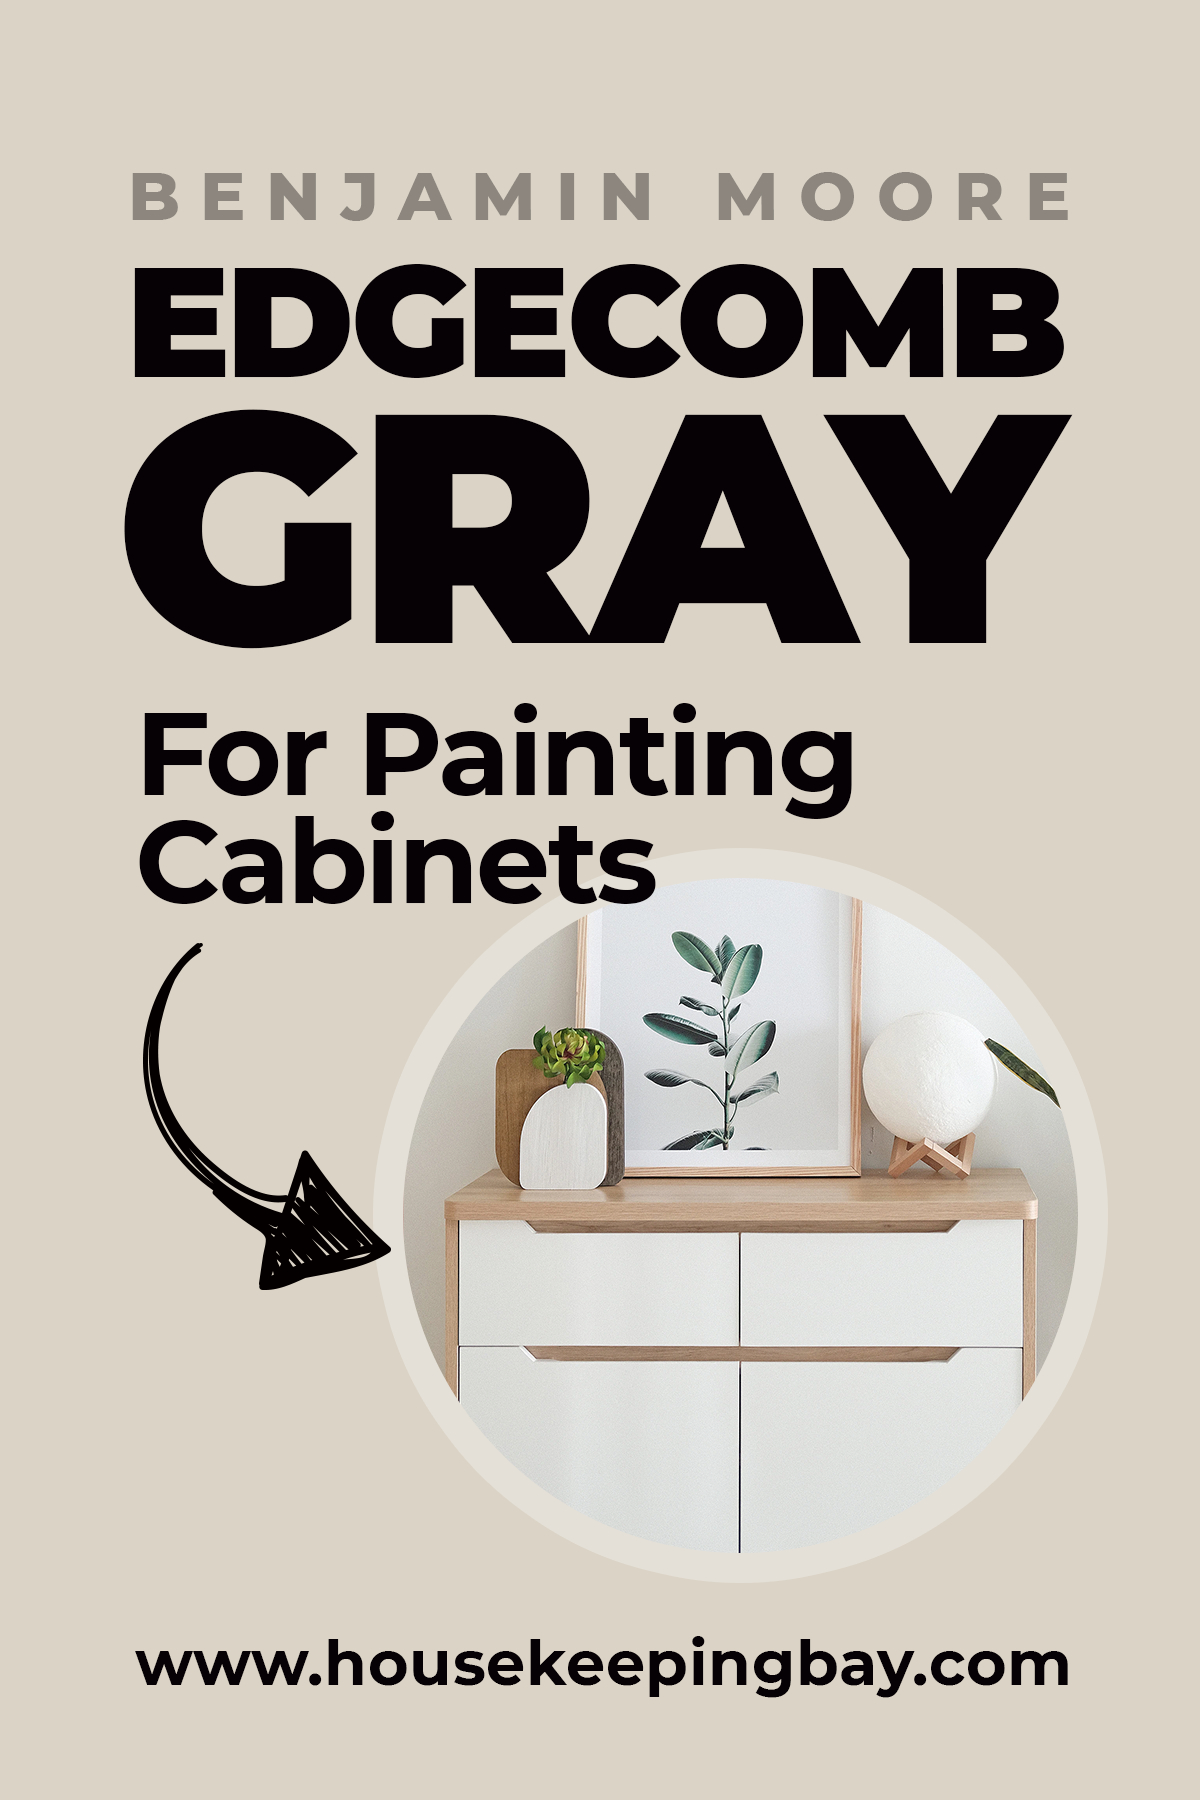 Edgecomb Gray For Painting Cabinets